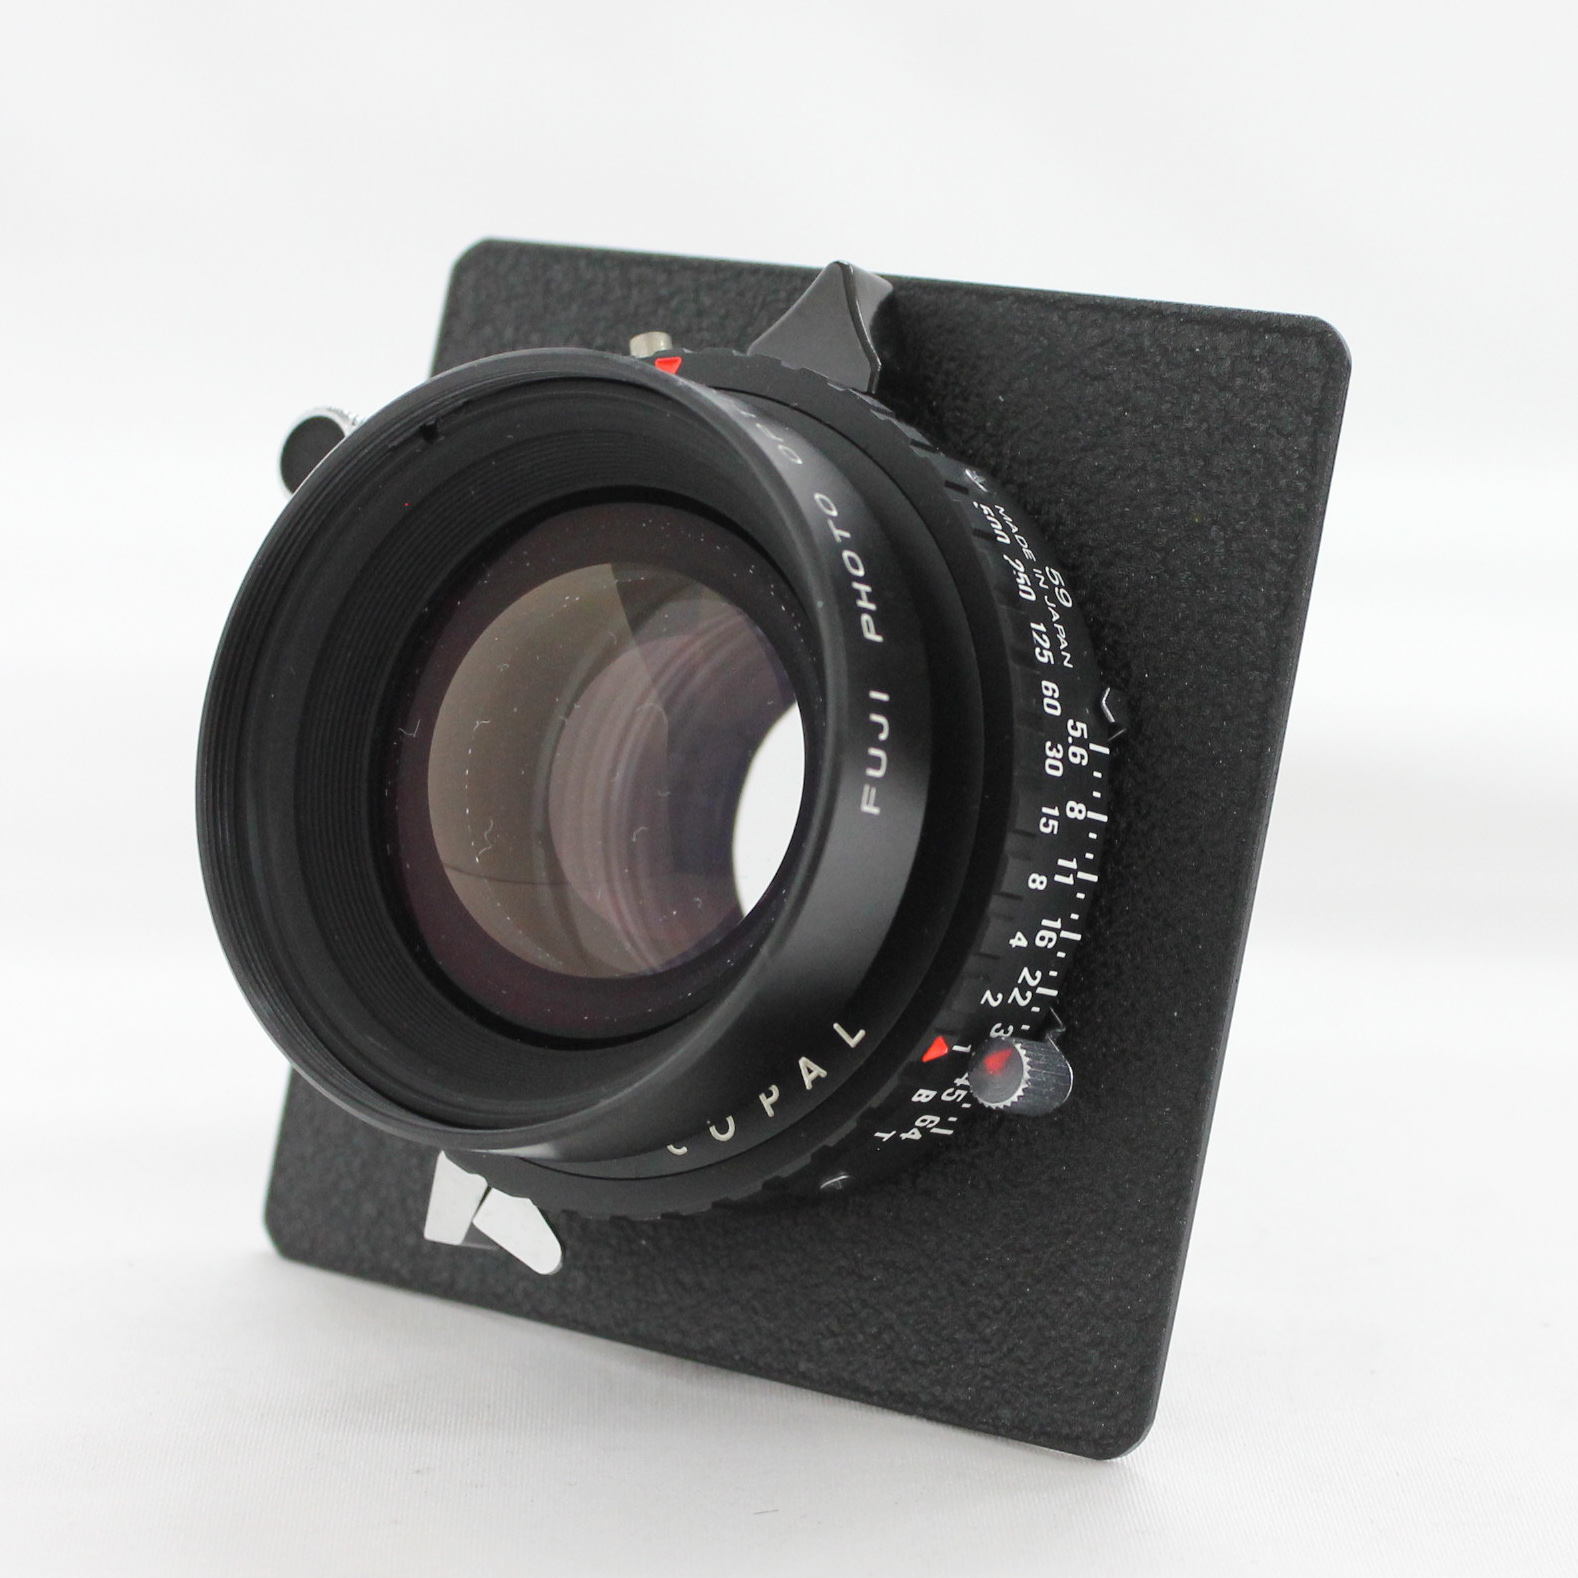 Japan Used Camera Shop | [Excellent+++++] Fujinon W 125mm F/5.6 4x5 Large Format Lens with Copal No.0 Shutter from Japan